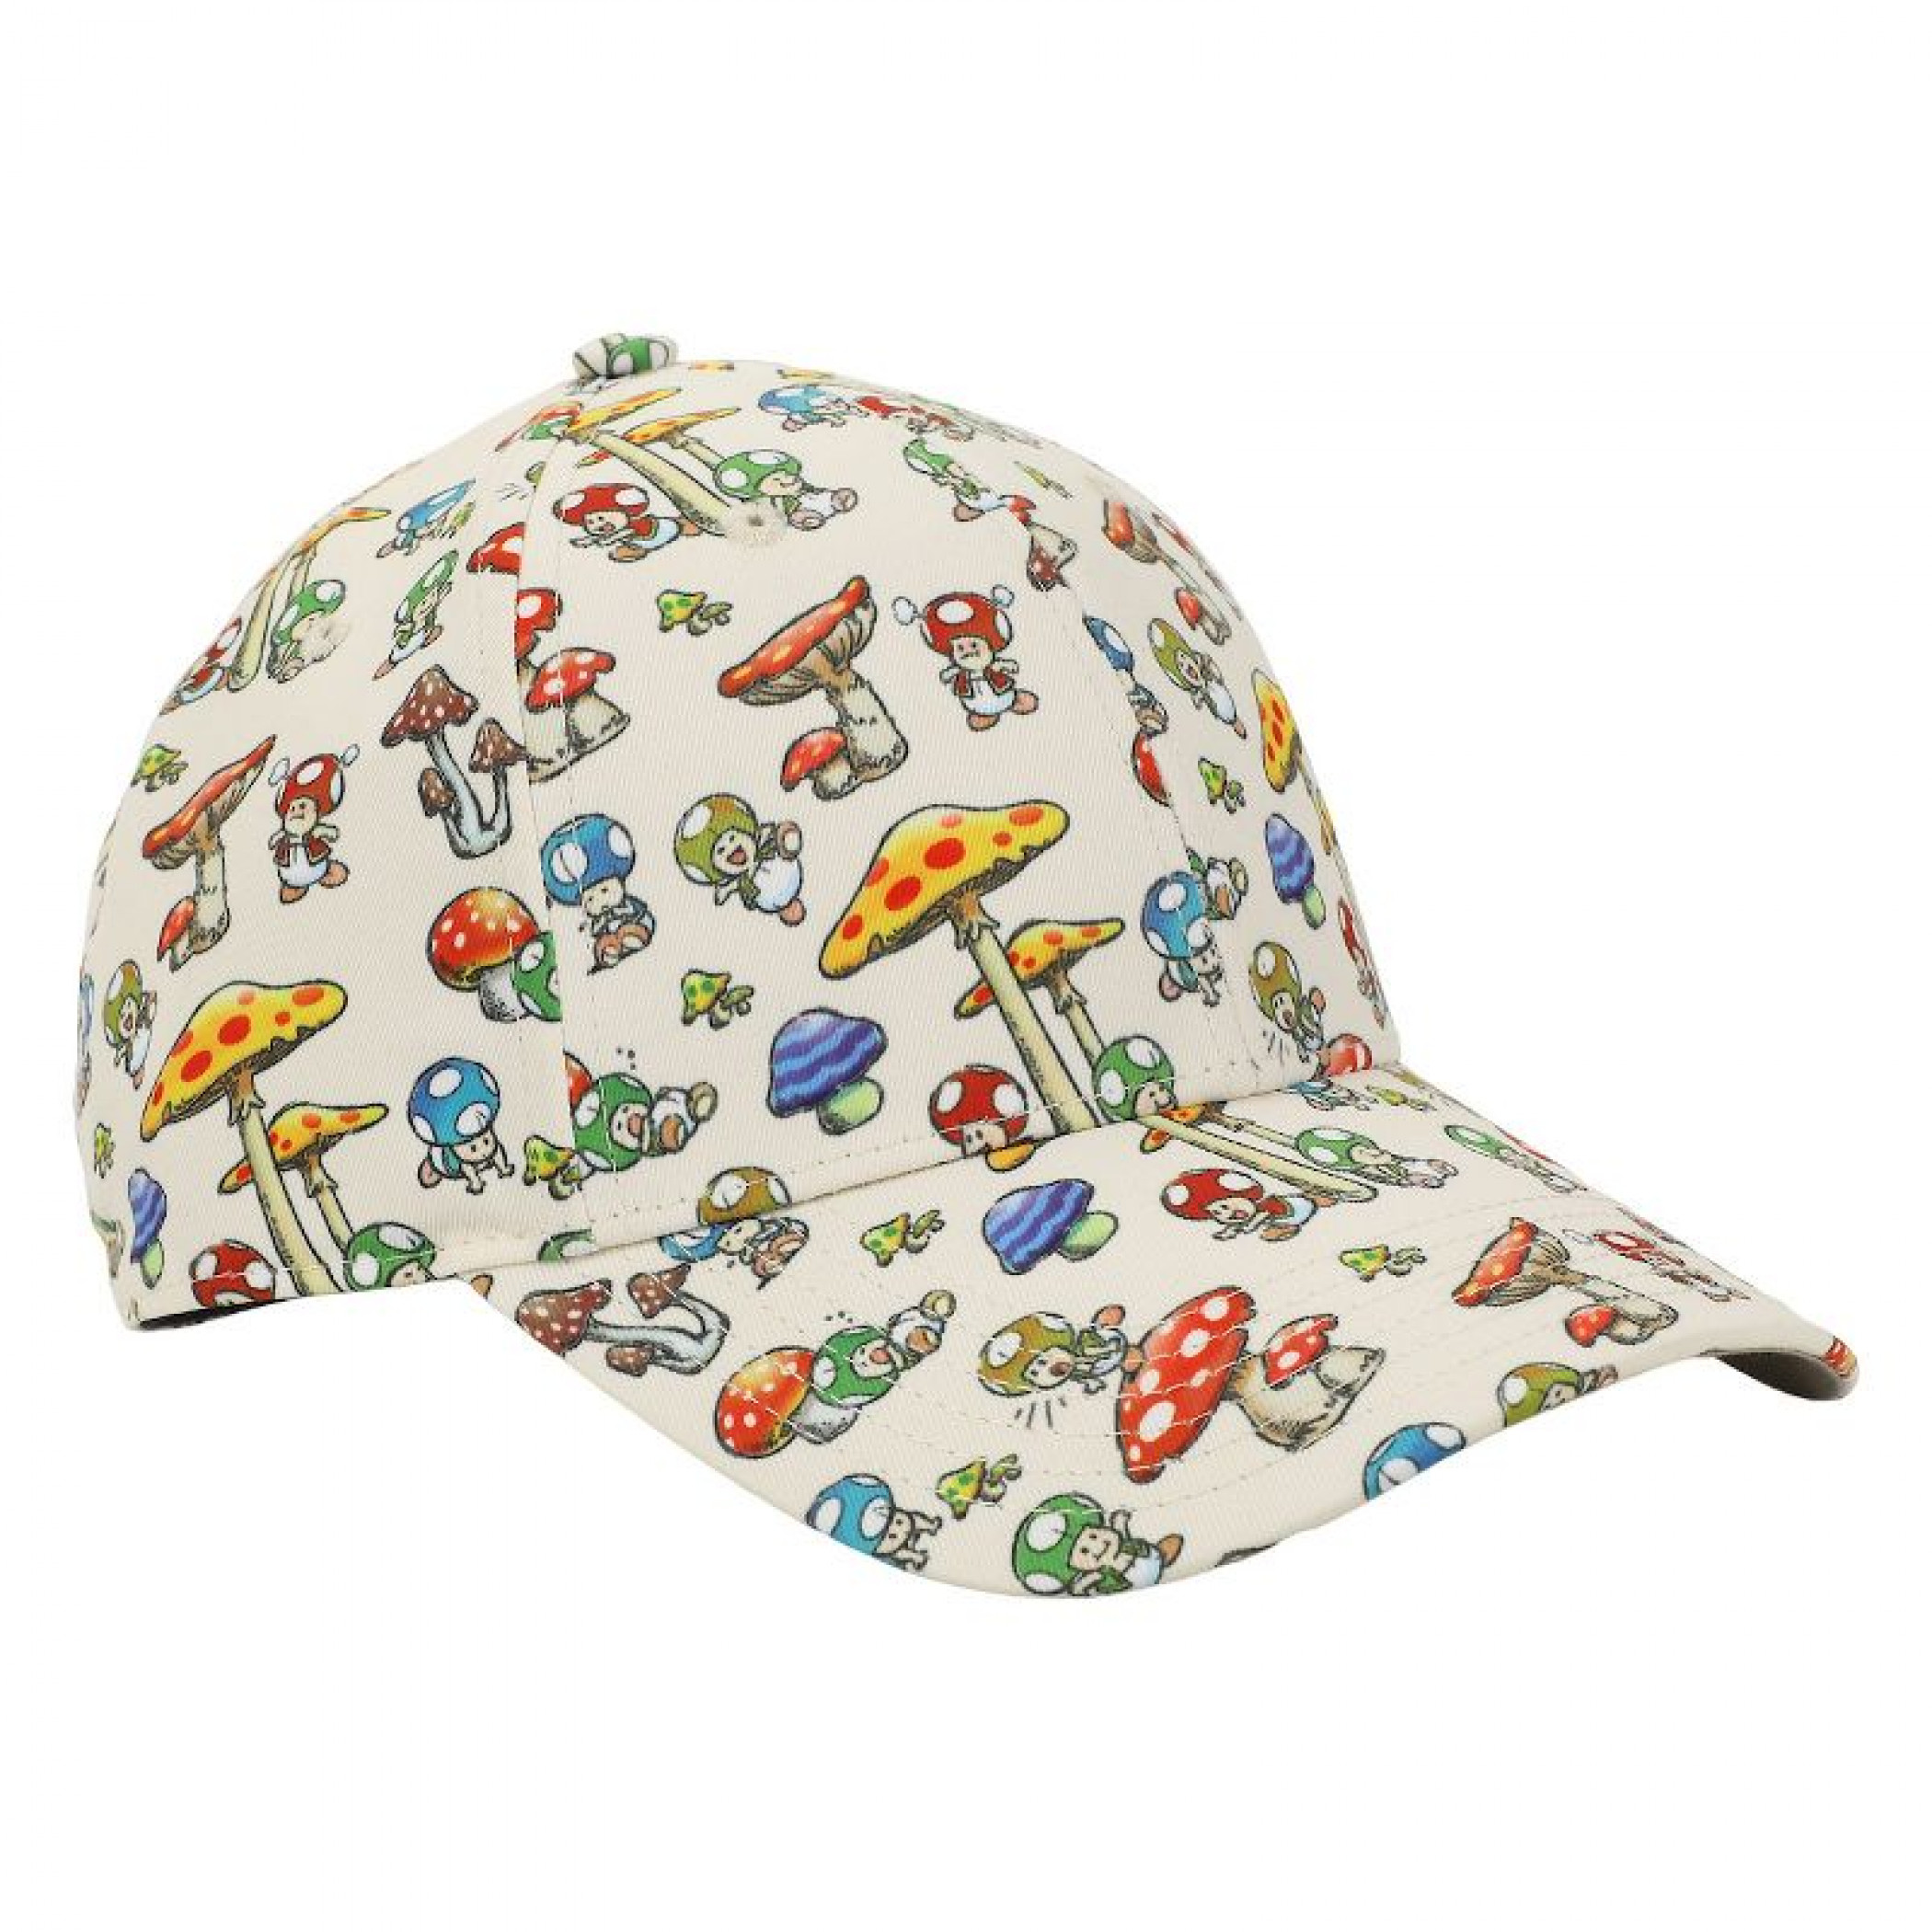 Super Mario Bros. Toad and Mushrooms Pre-Curved Snapback Hat